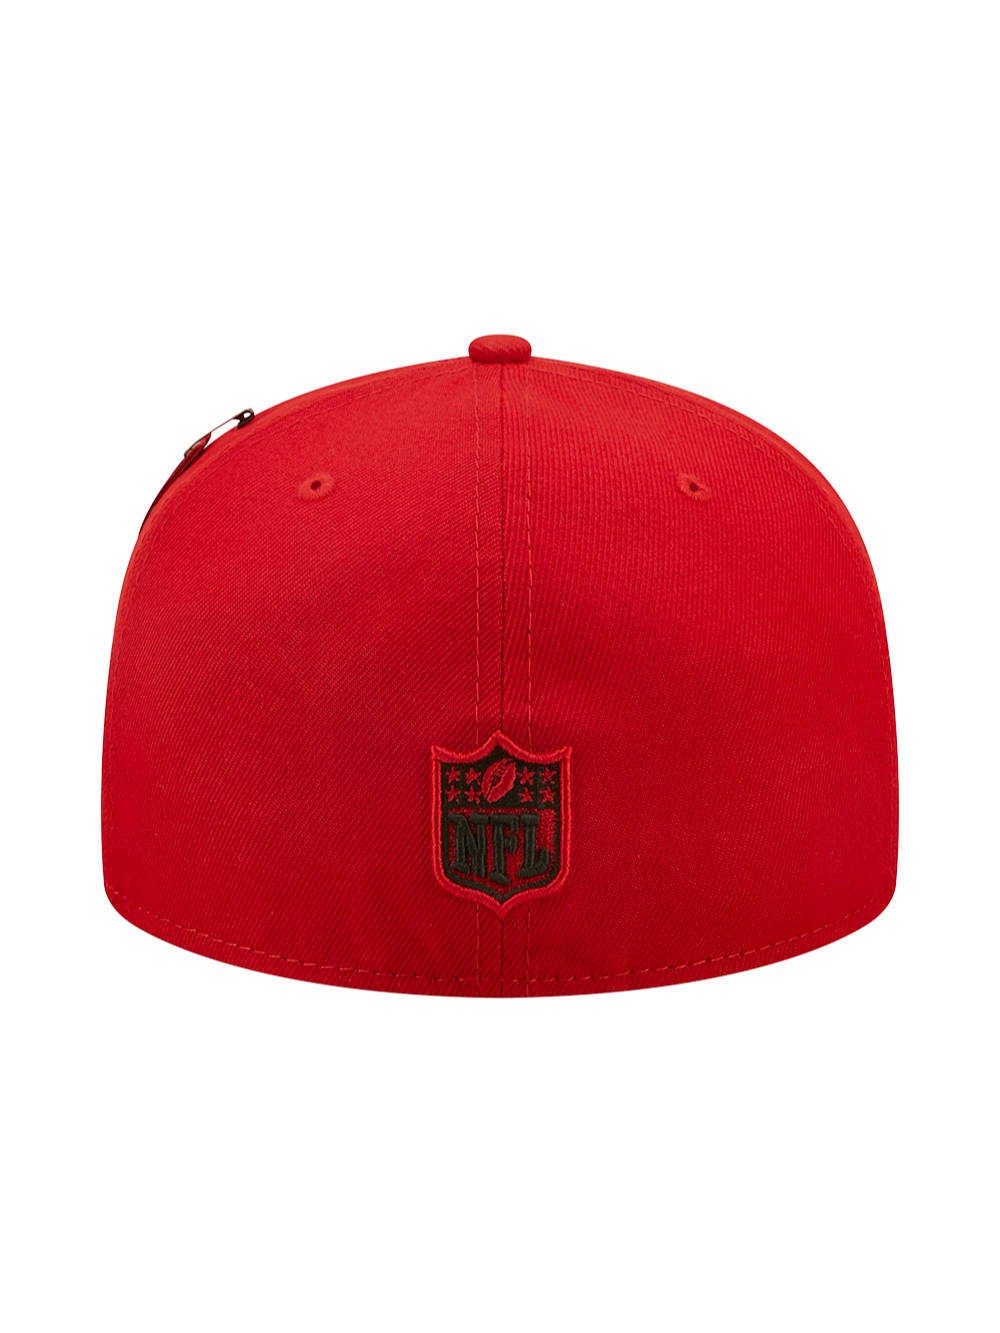 SAN FRANCISCO 49ERS X ALPHA X NEW ERA 59FIFTY FITTED CAP ACCESSORY Alpha Industries 